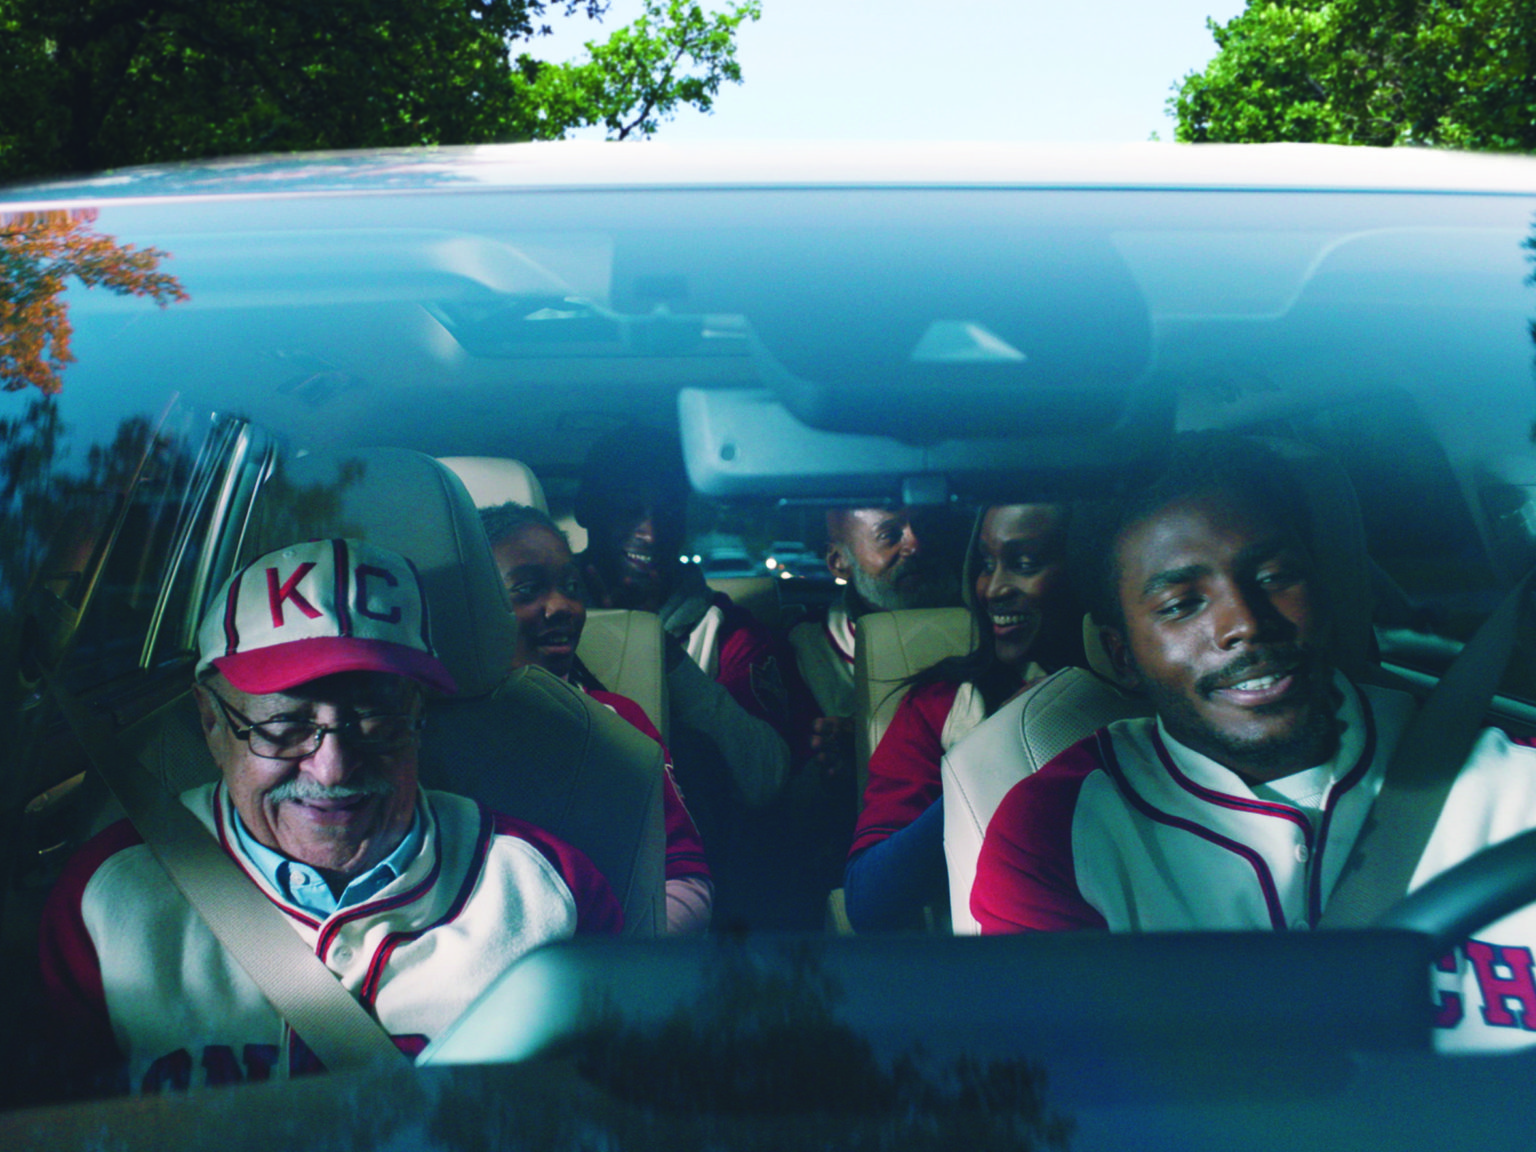 Toyota is celebrating the history of baseball's Negro Leagues in its new commercial.